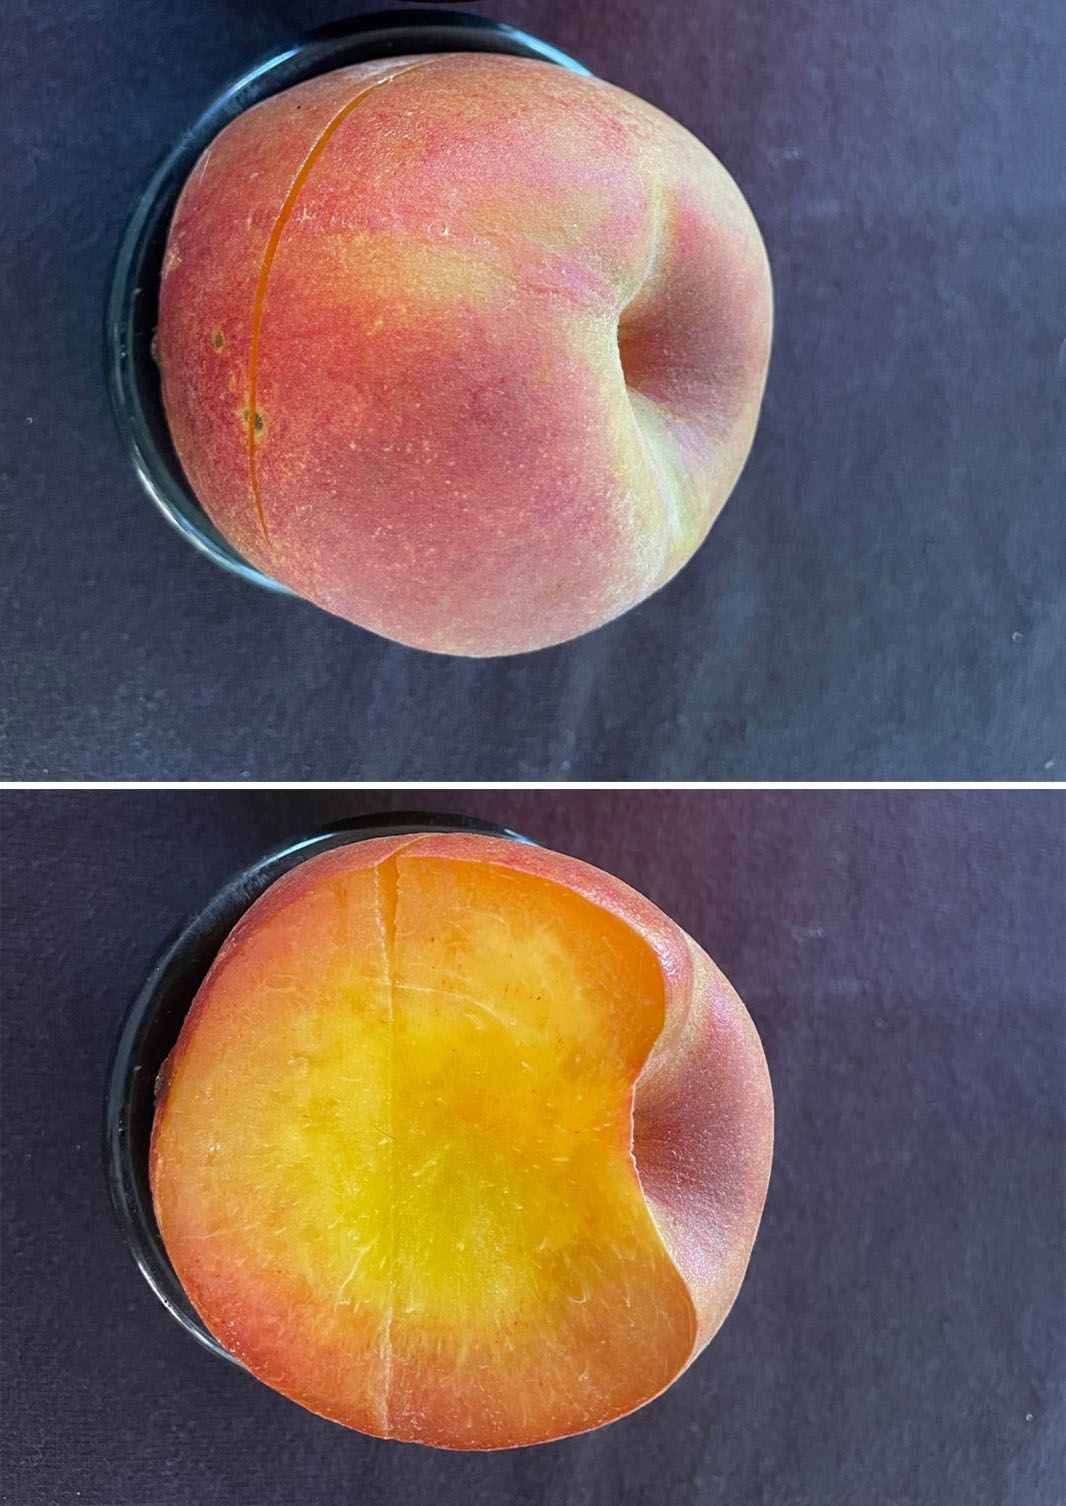 External surface scald (top) and internal flesh browning (bottom) are symptoms of heat injury.